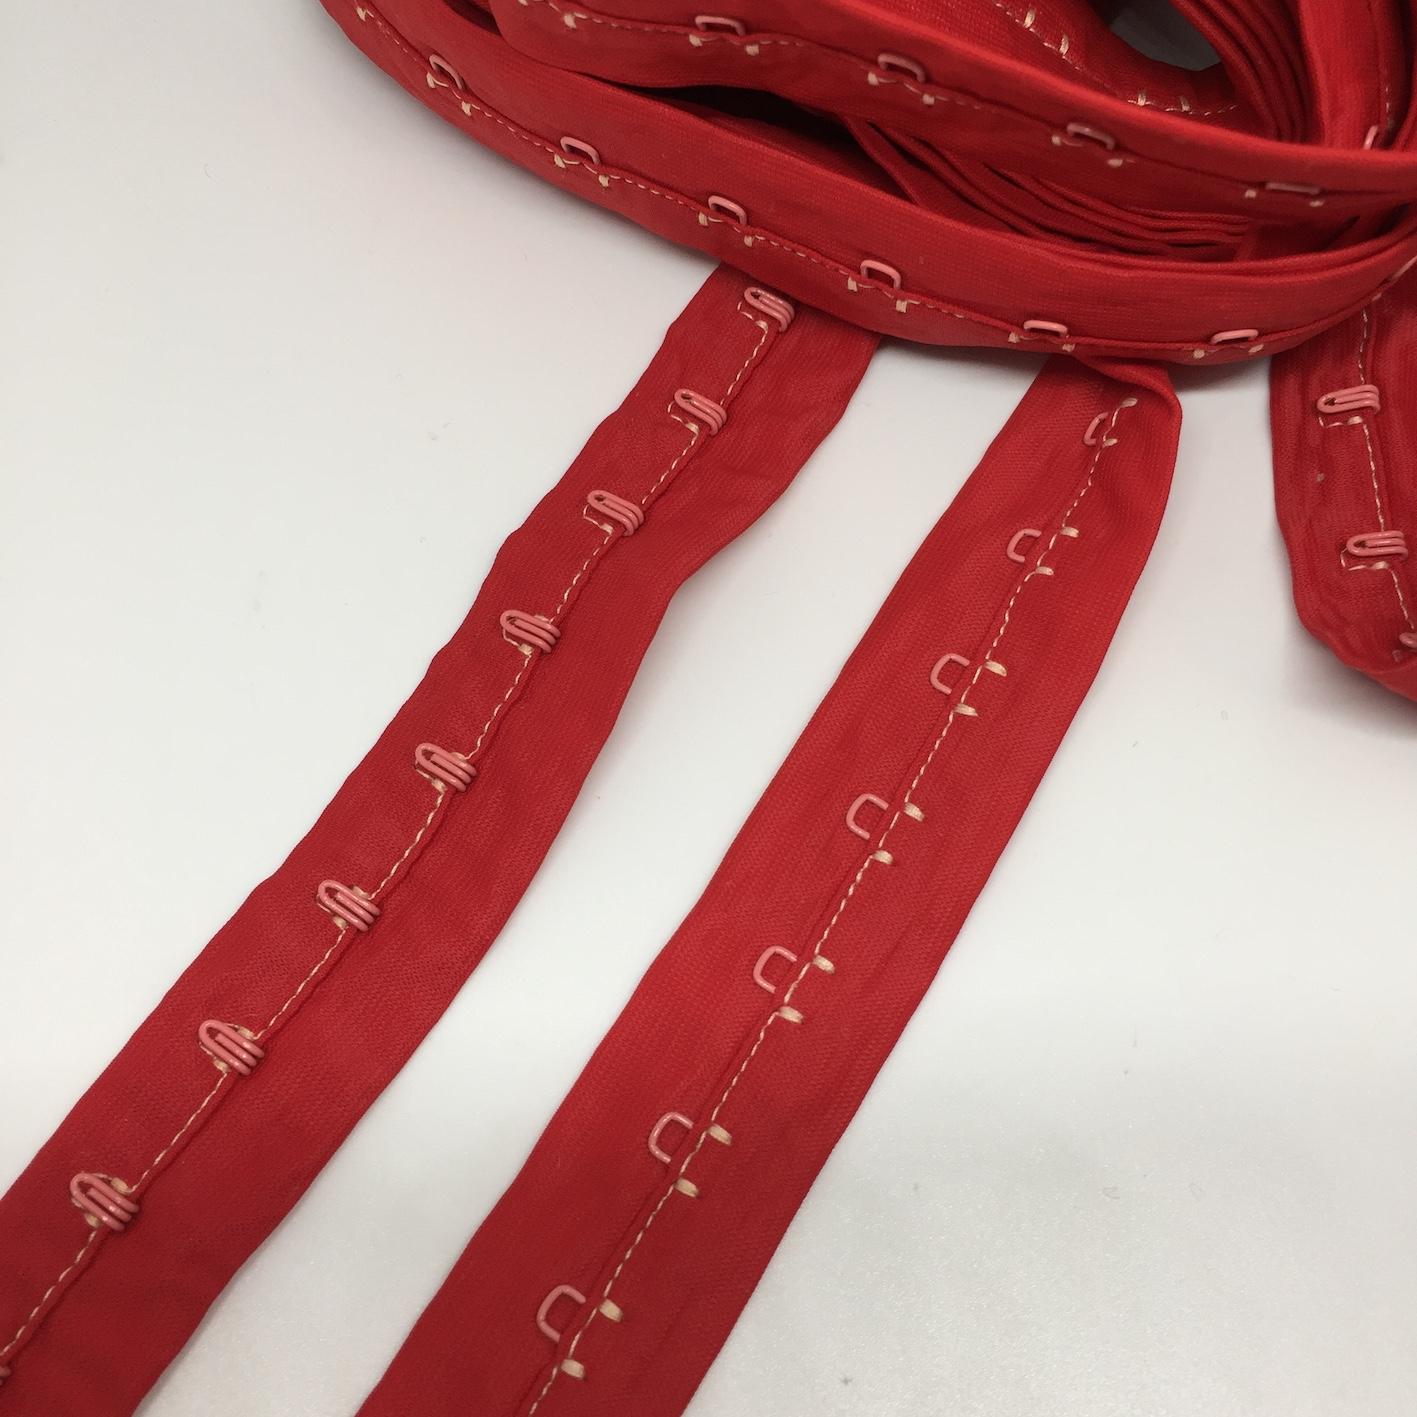 Bra Hook and Eye Tape - Plain Back - Single - 19mm - RED (post-dyed) (red  metal fittings), per metre (both sides)